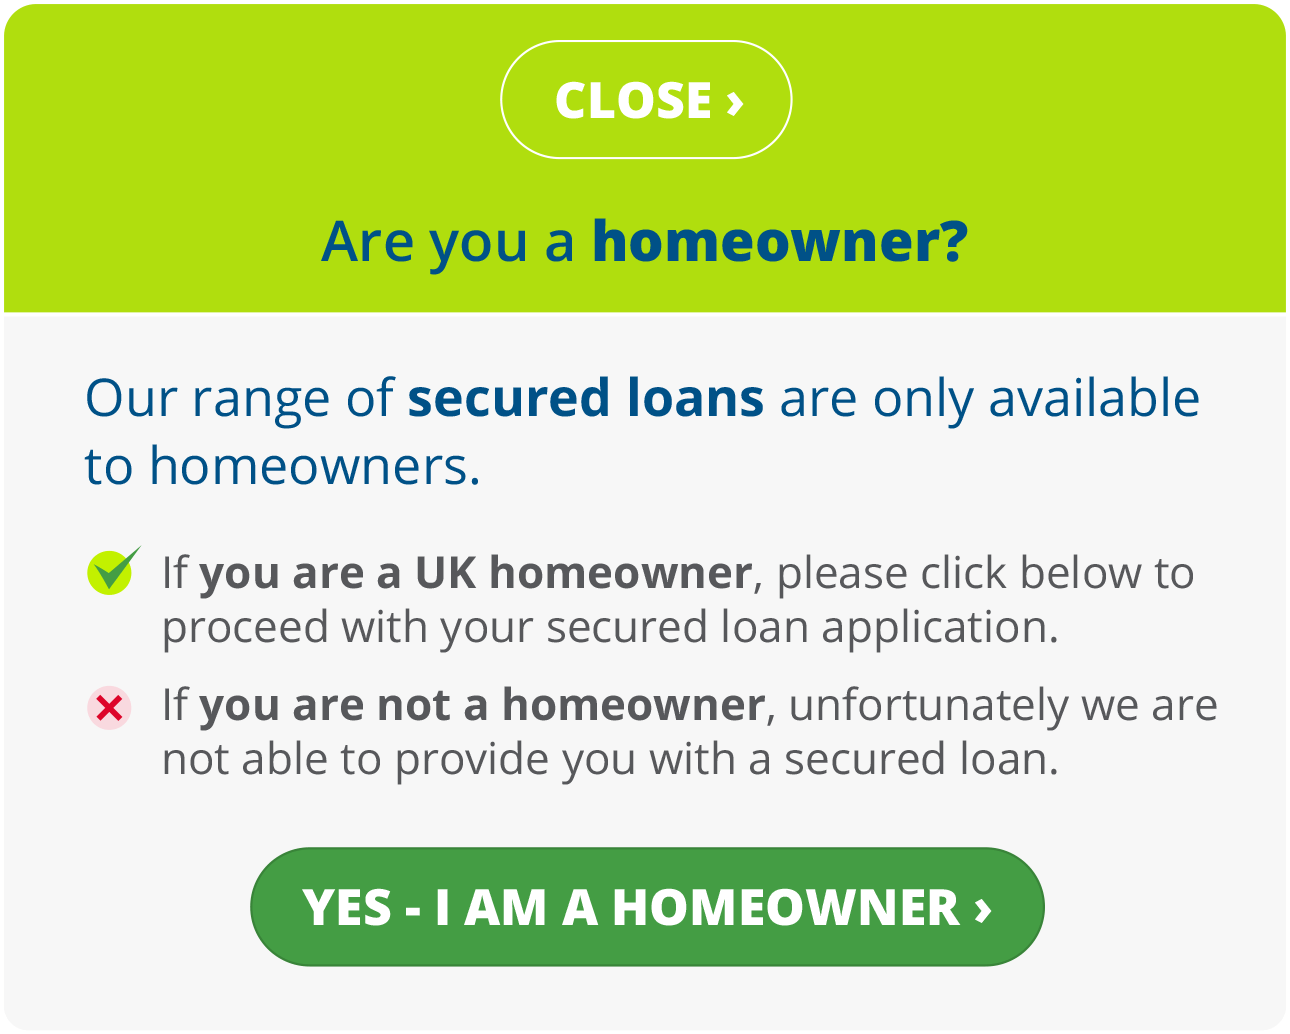 Are you a homeowner?